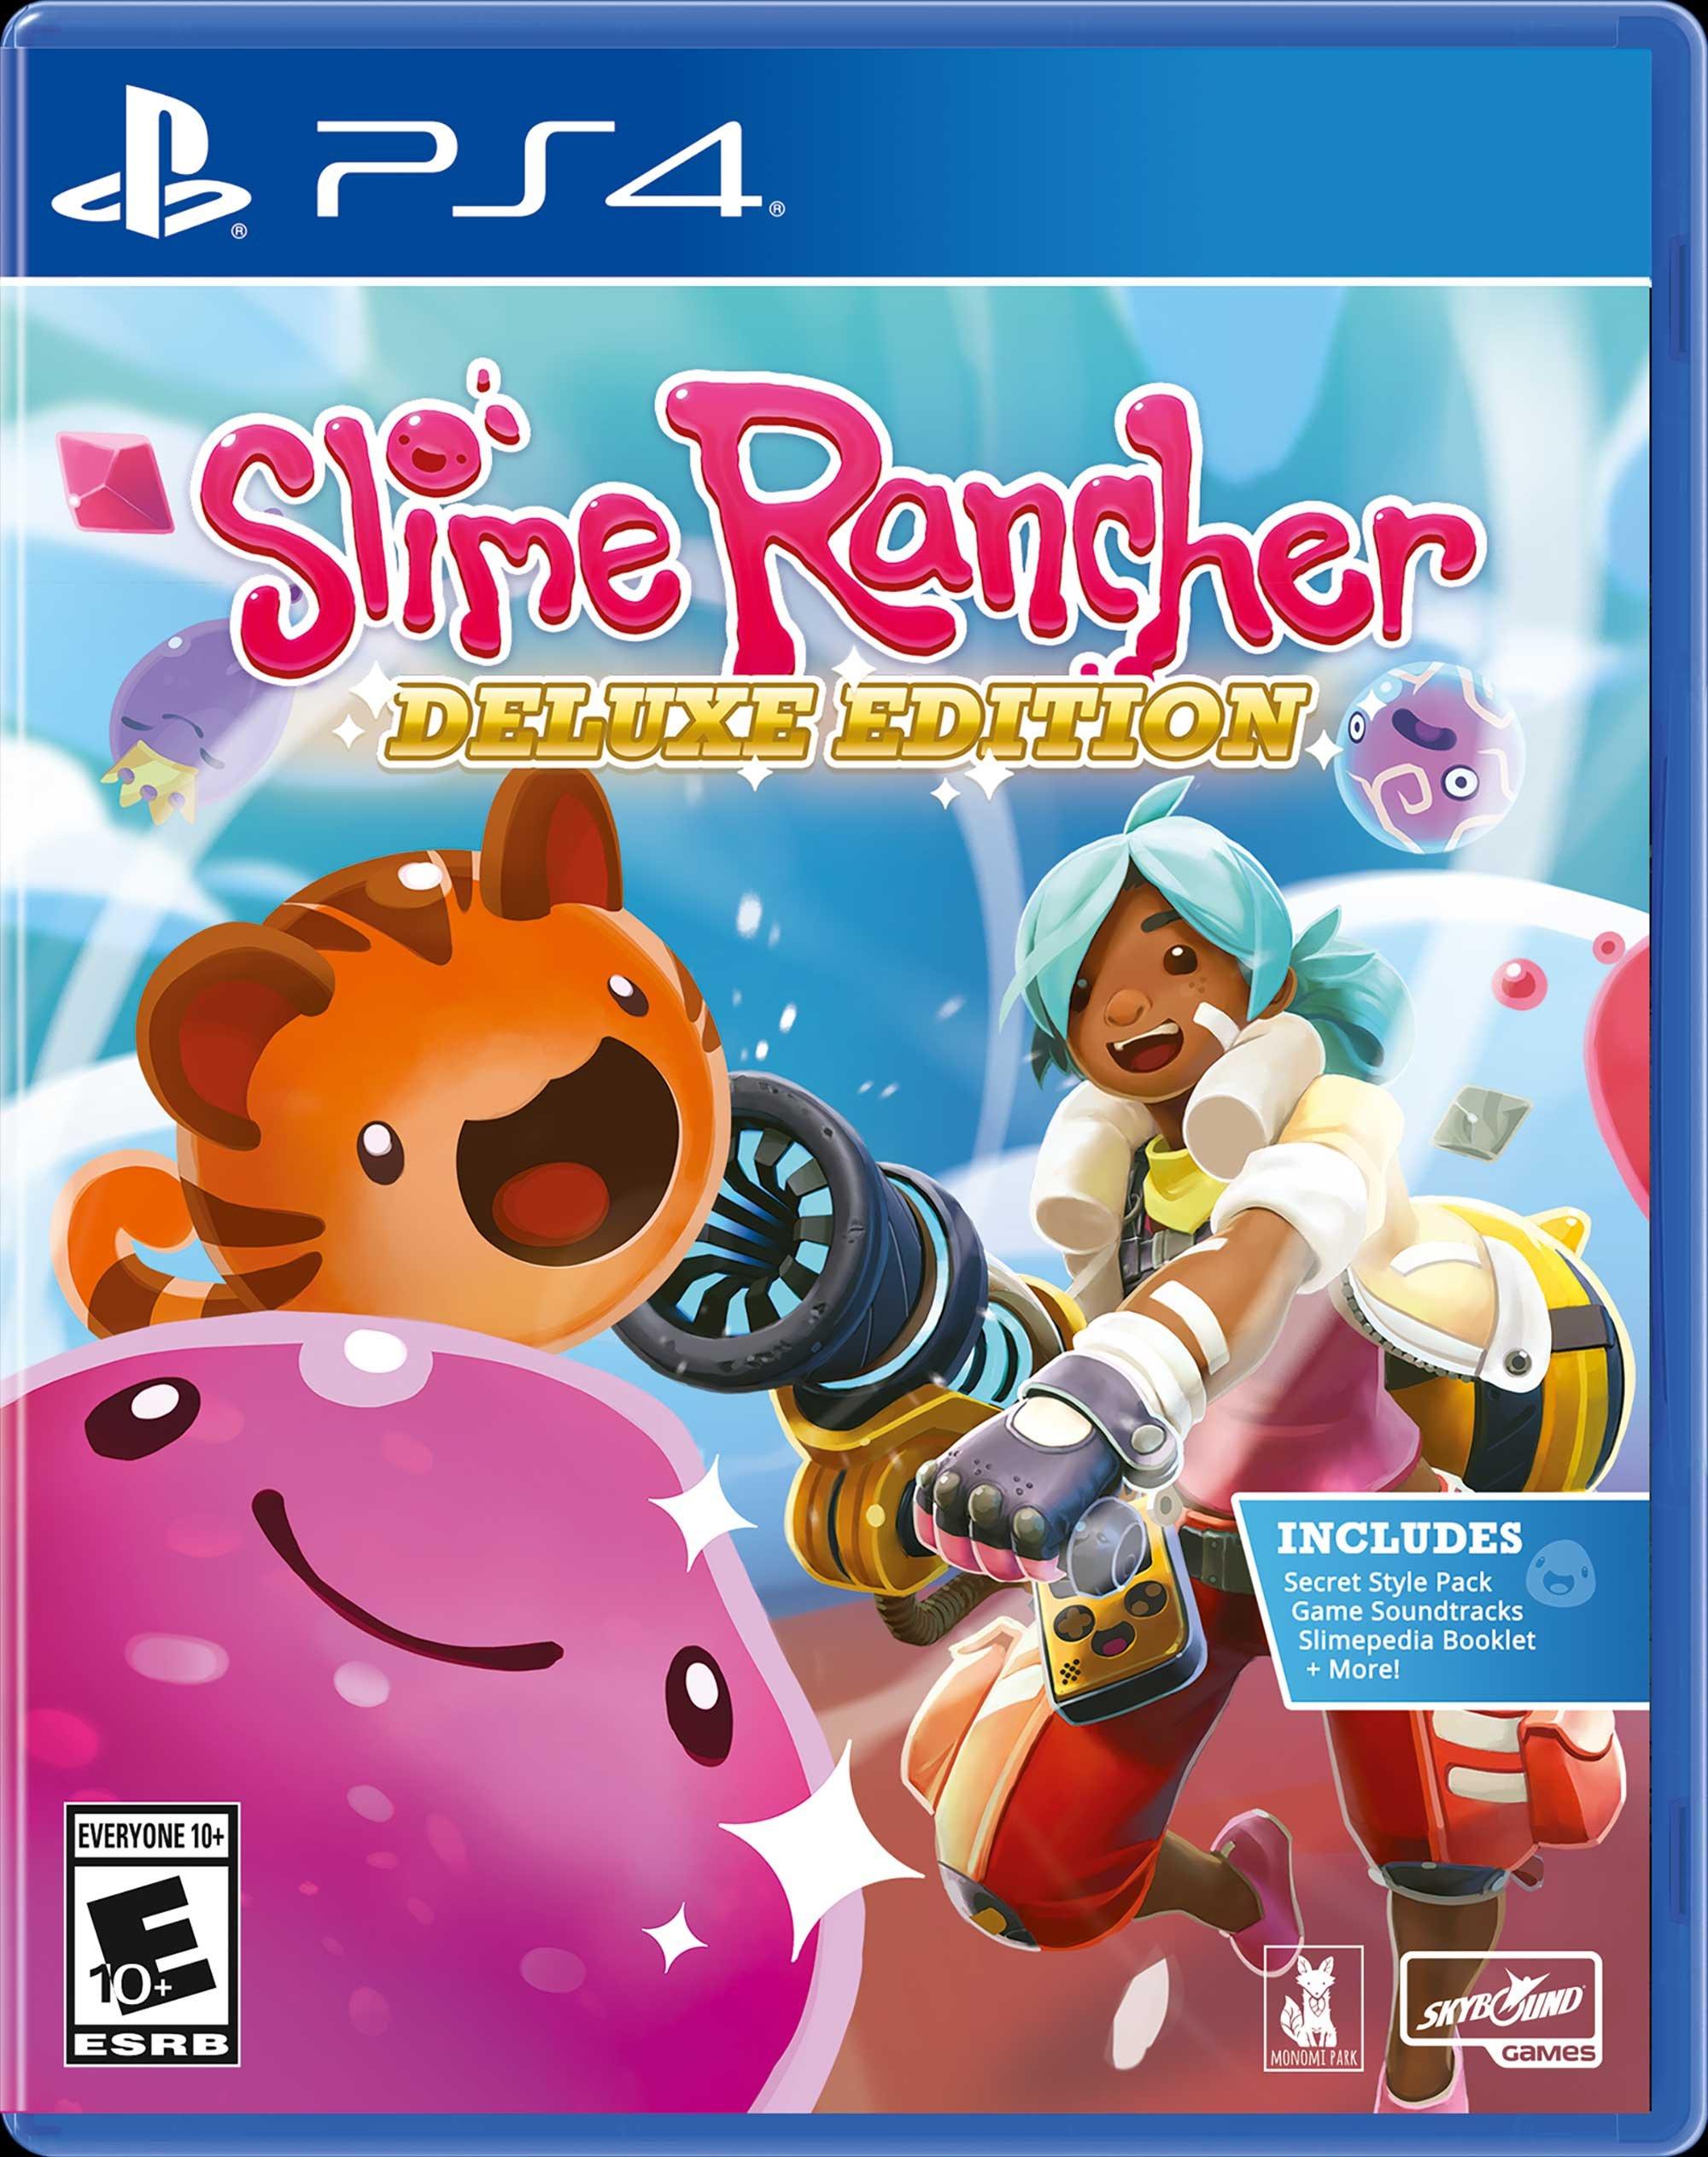 How to play Slime Rancher 2 — acclaimed family game launches as